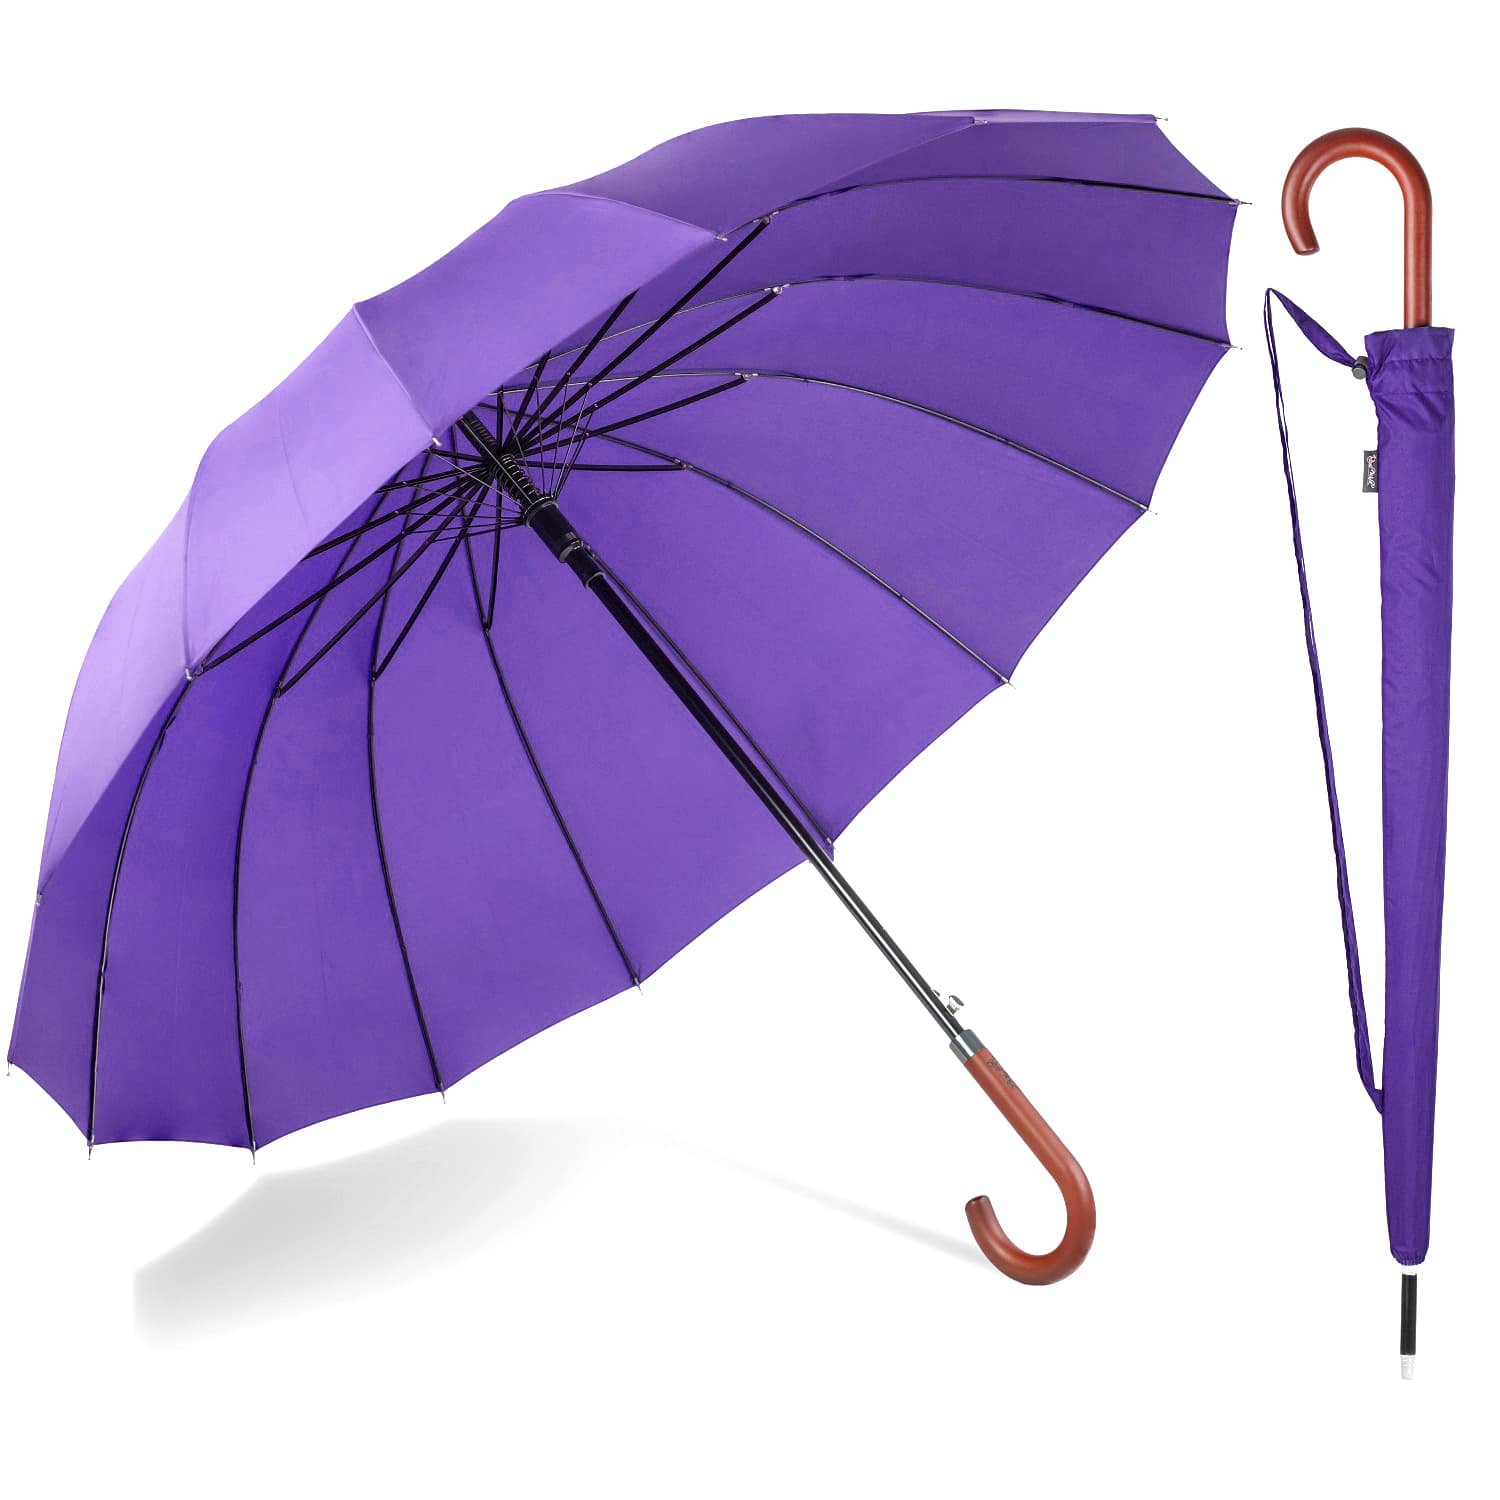 large umbrella for rain windproof strong wood handle 16ribs 120cm 54in purple 1500 1